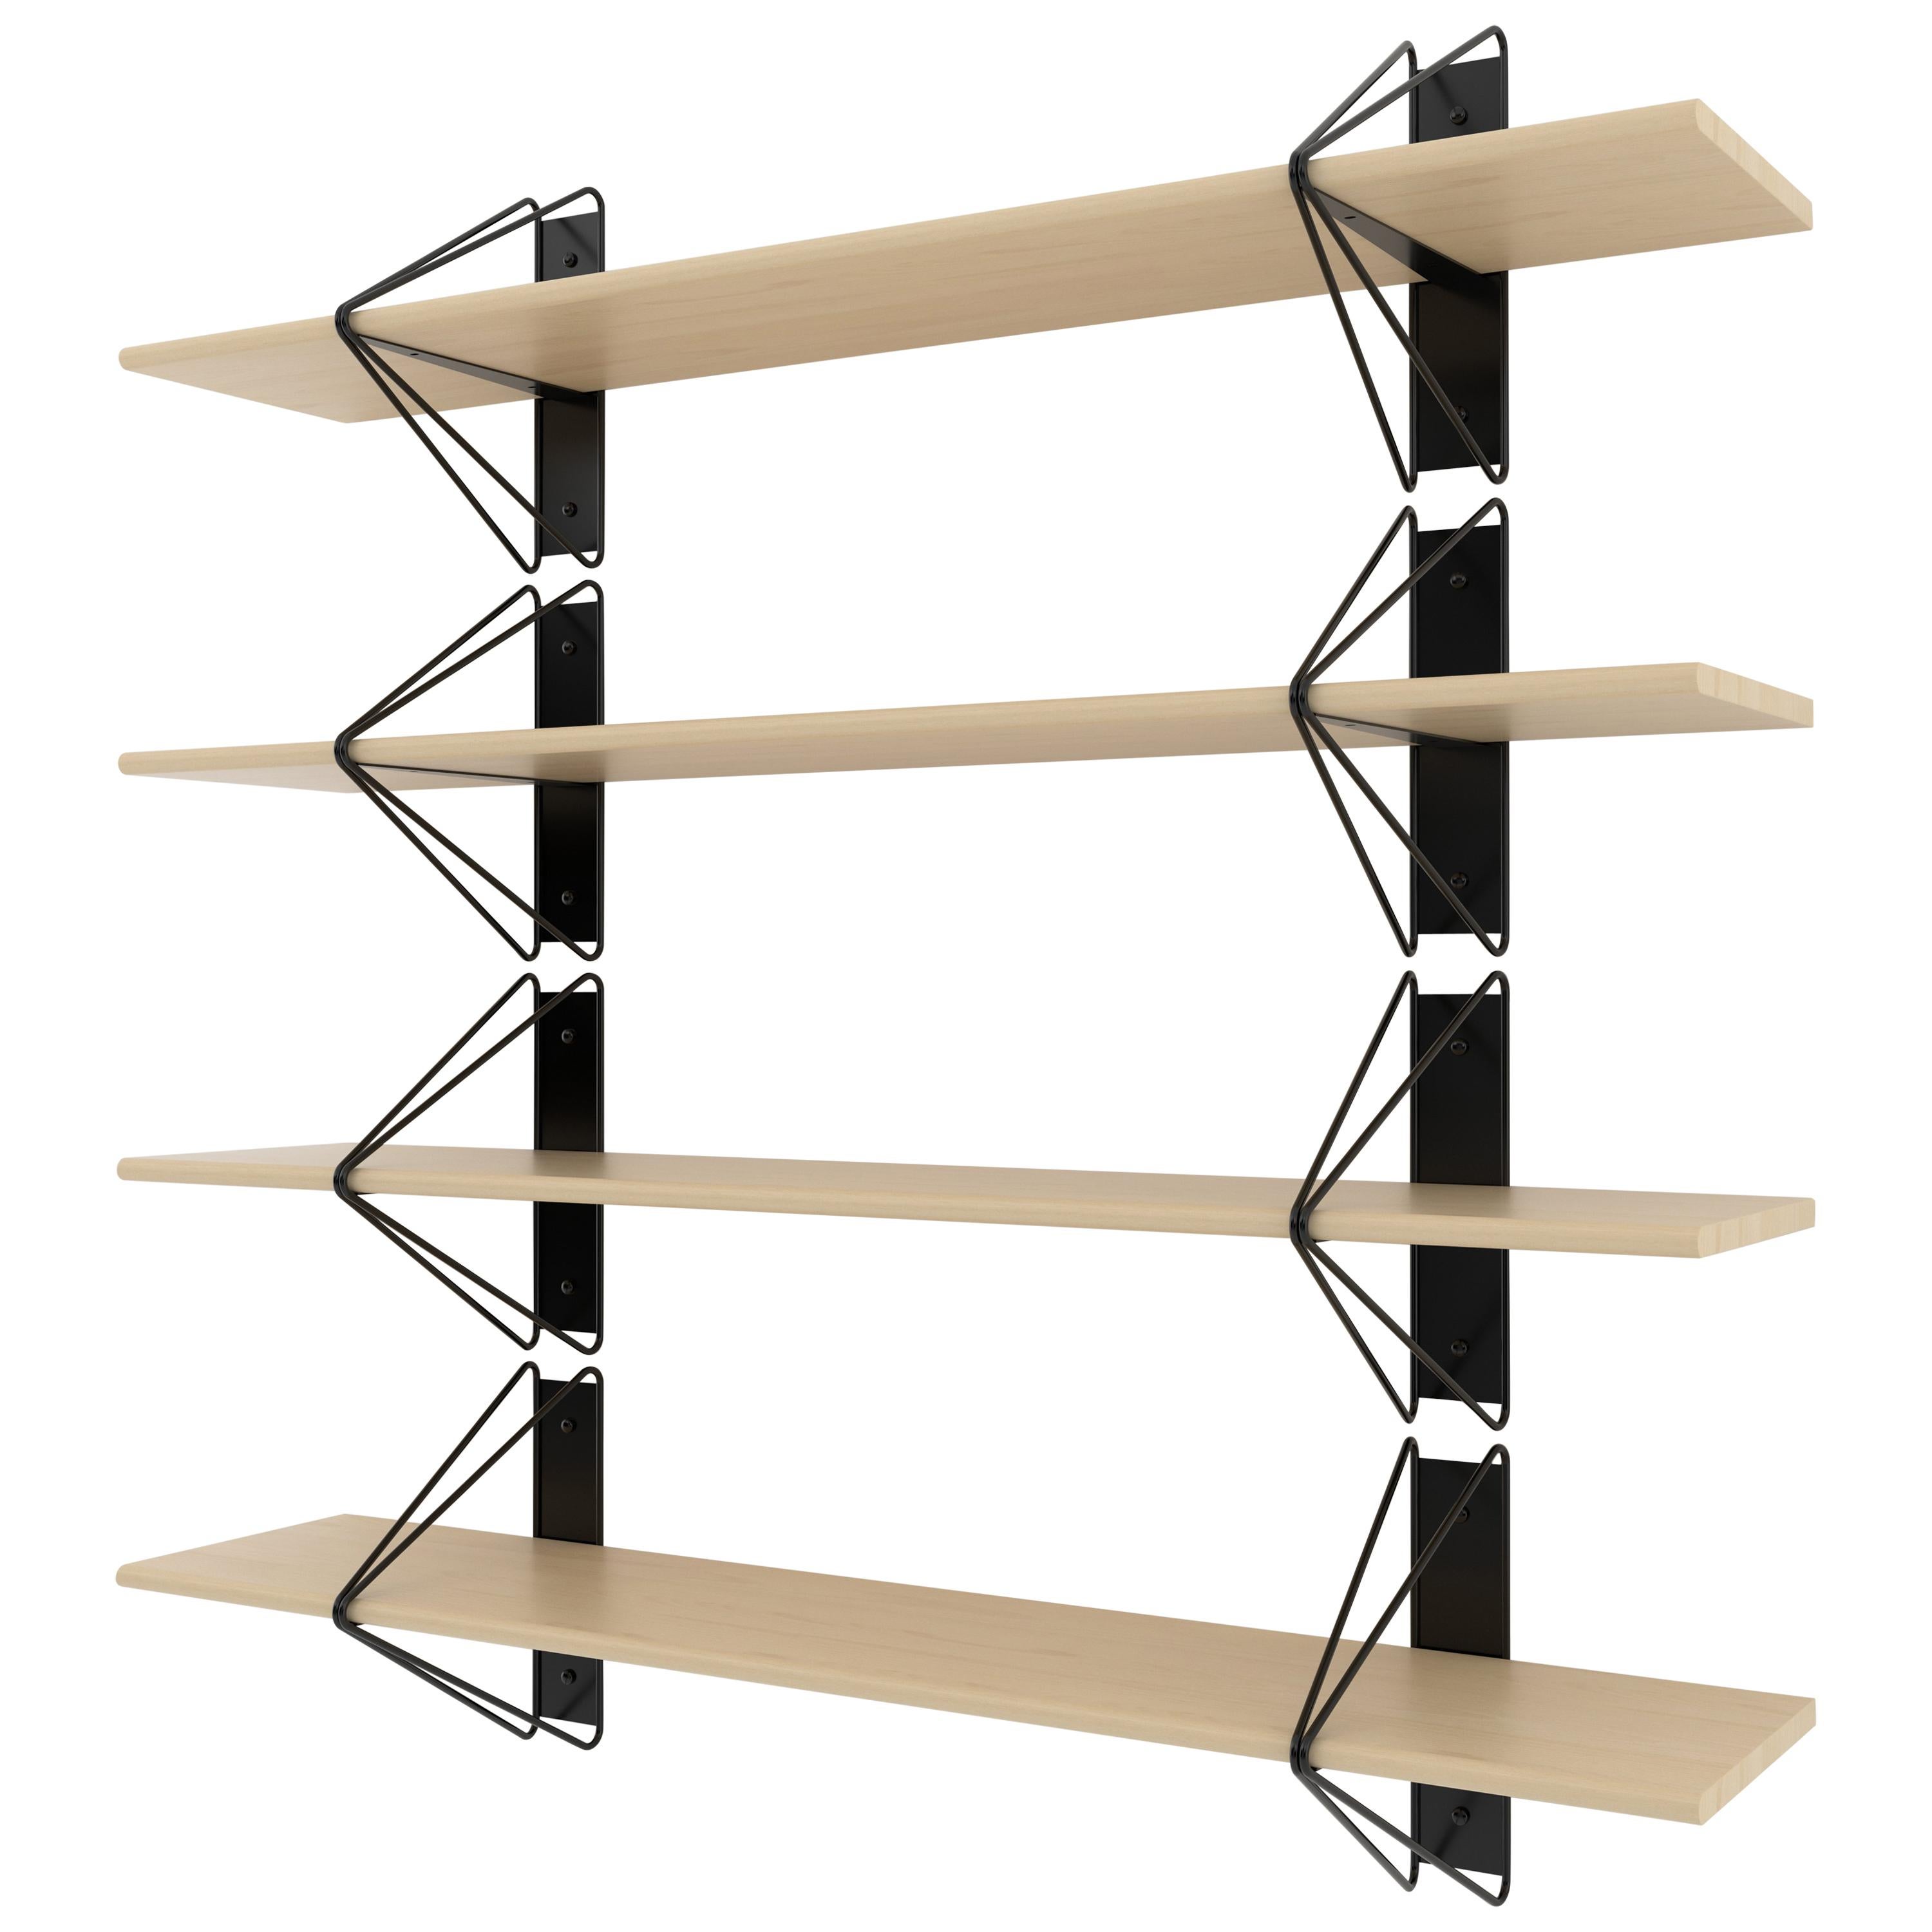 American Set of 4 Strut Shelves from Souda, 84in, Black and Maple, Made to Order For Sale